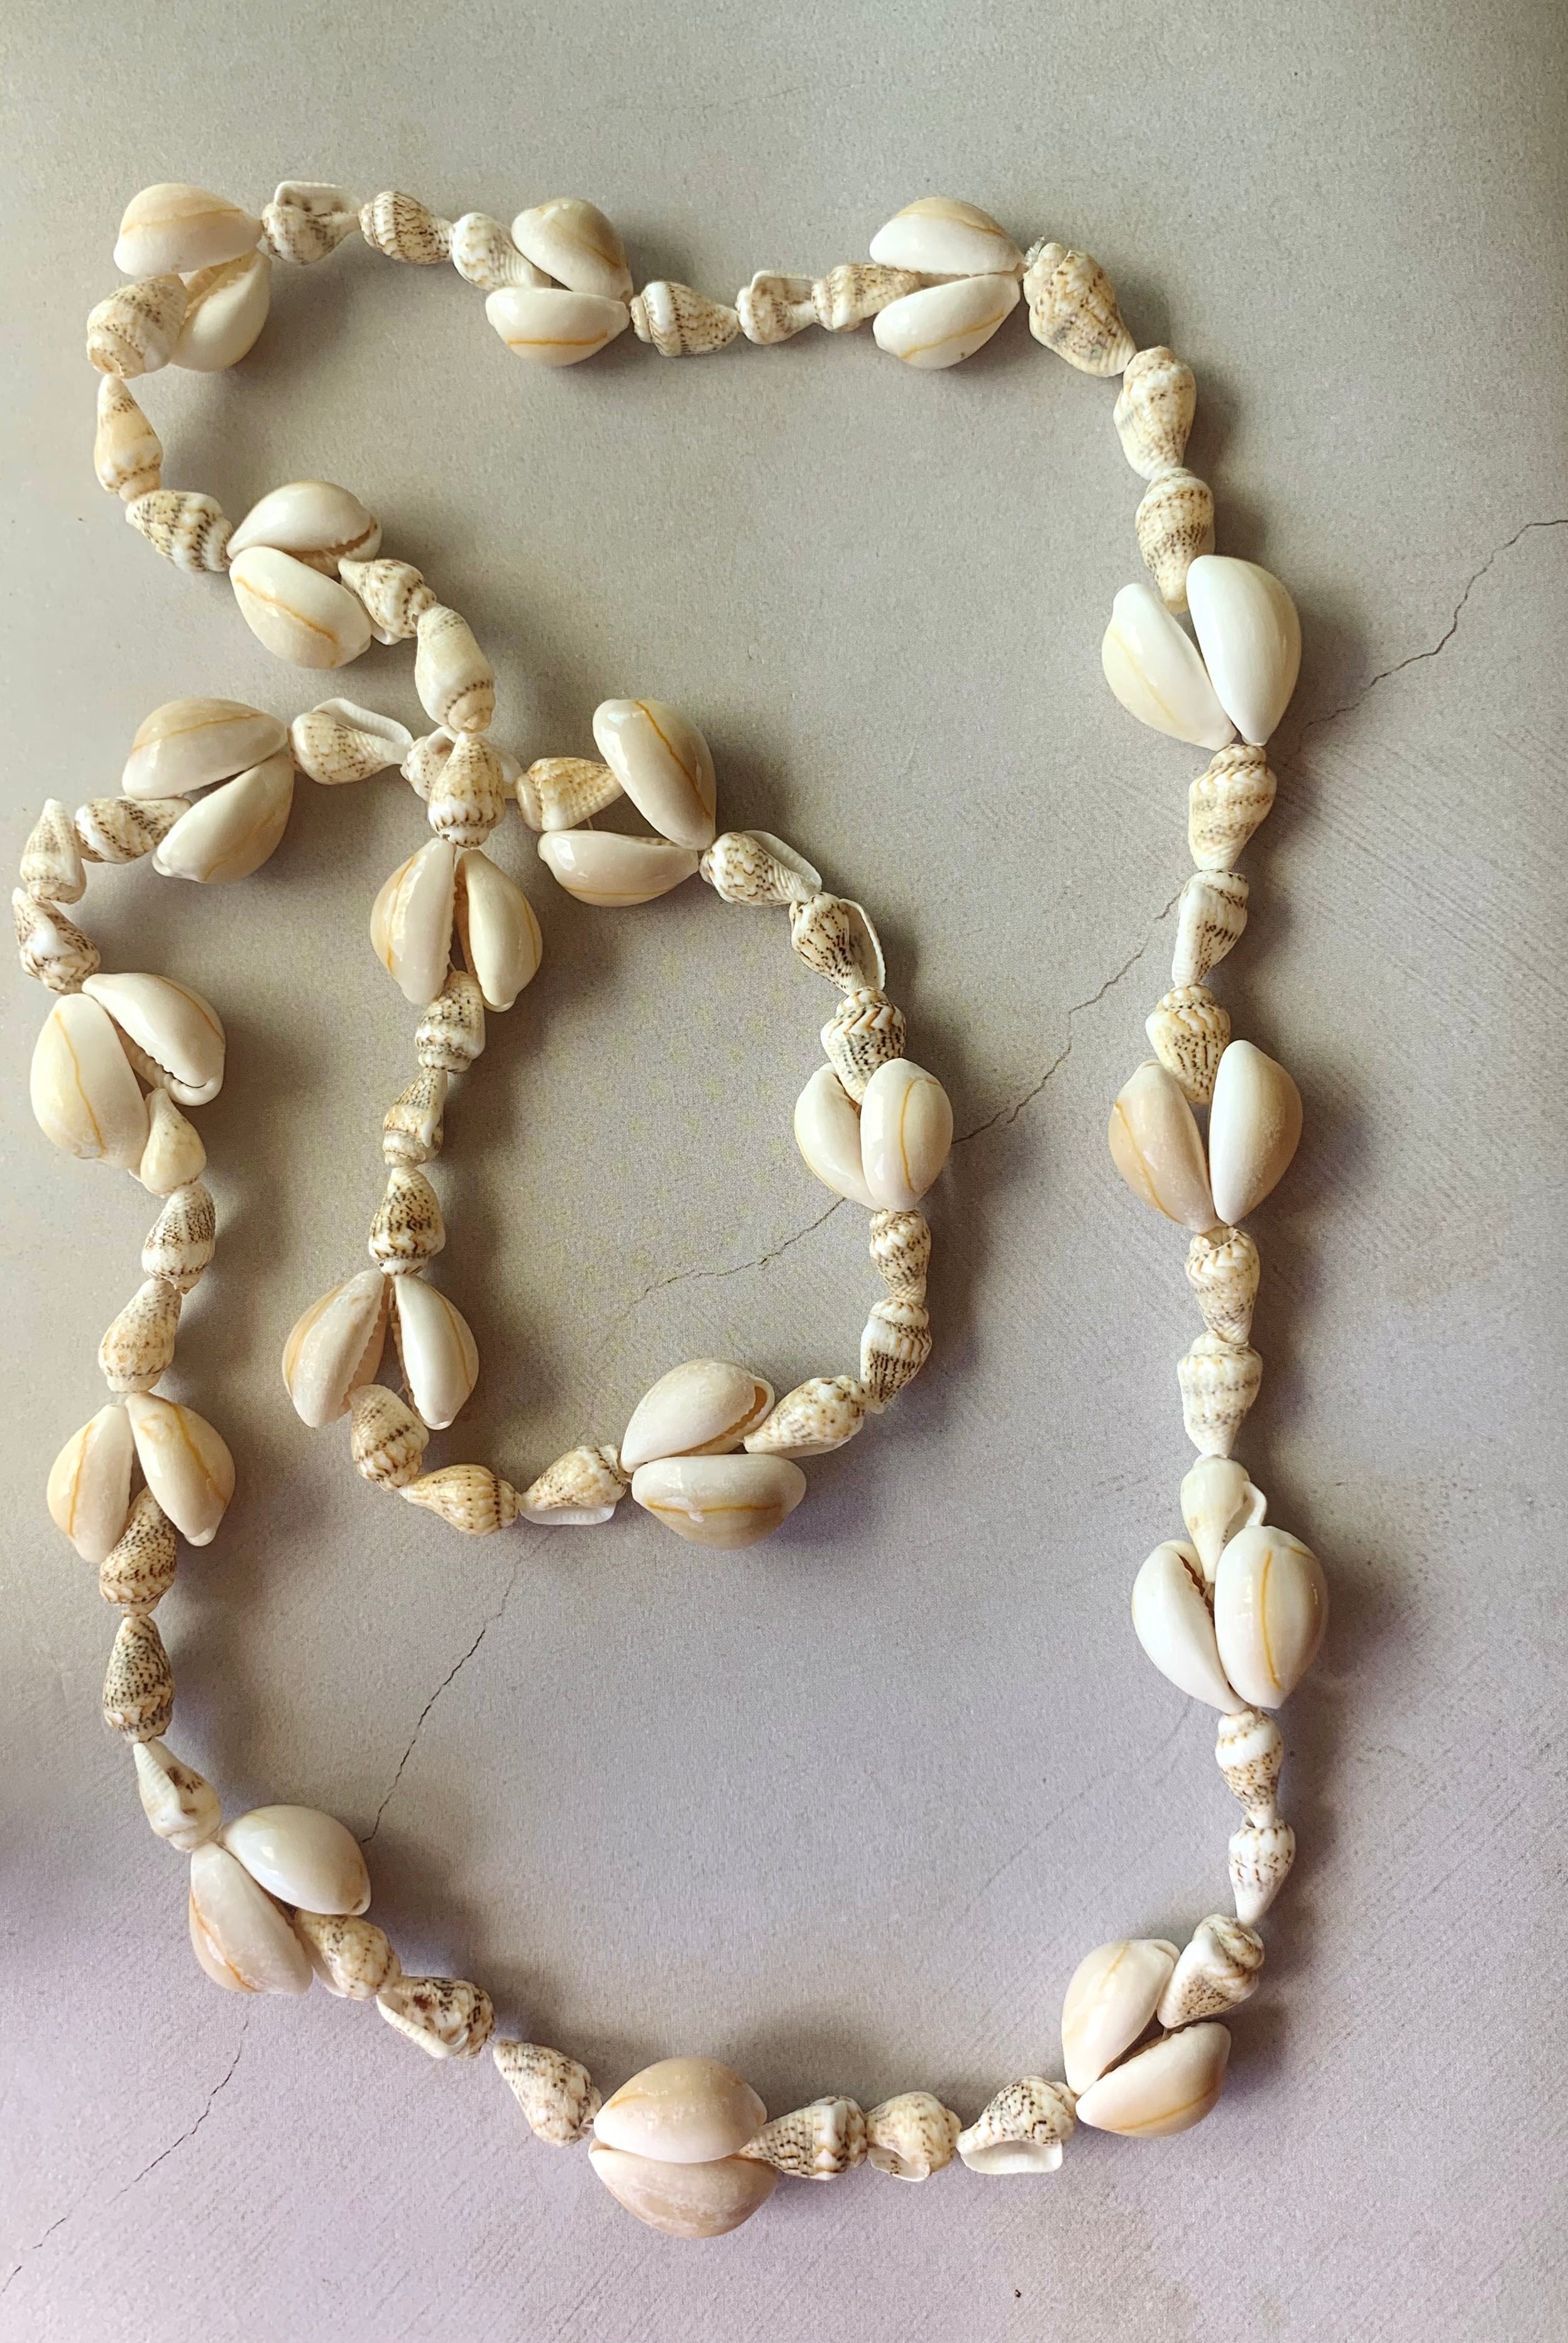 Kona Cowrie + Cone Shell Lei necklace